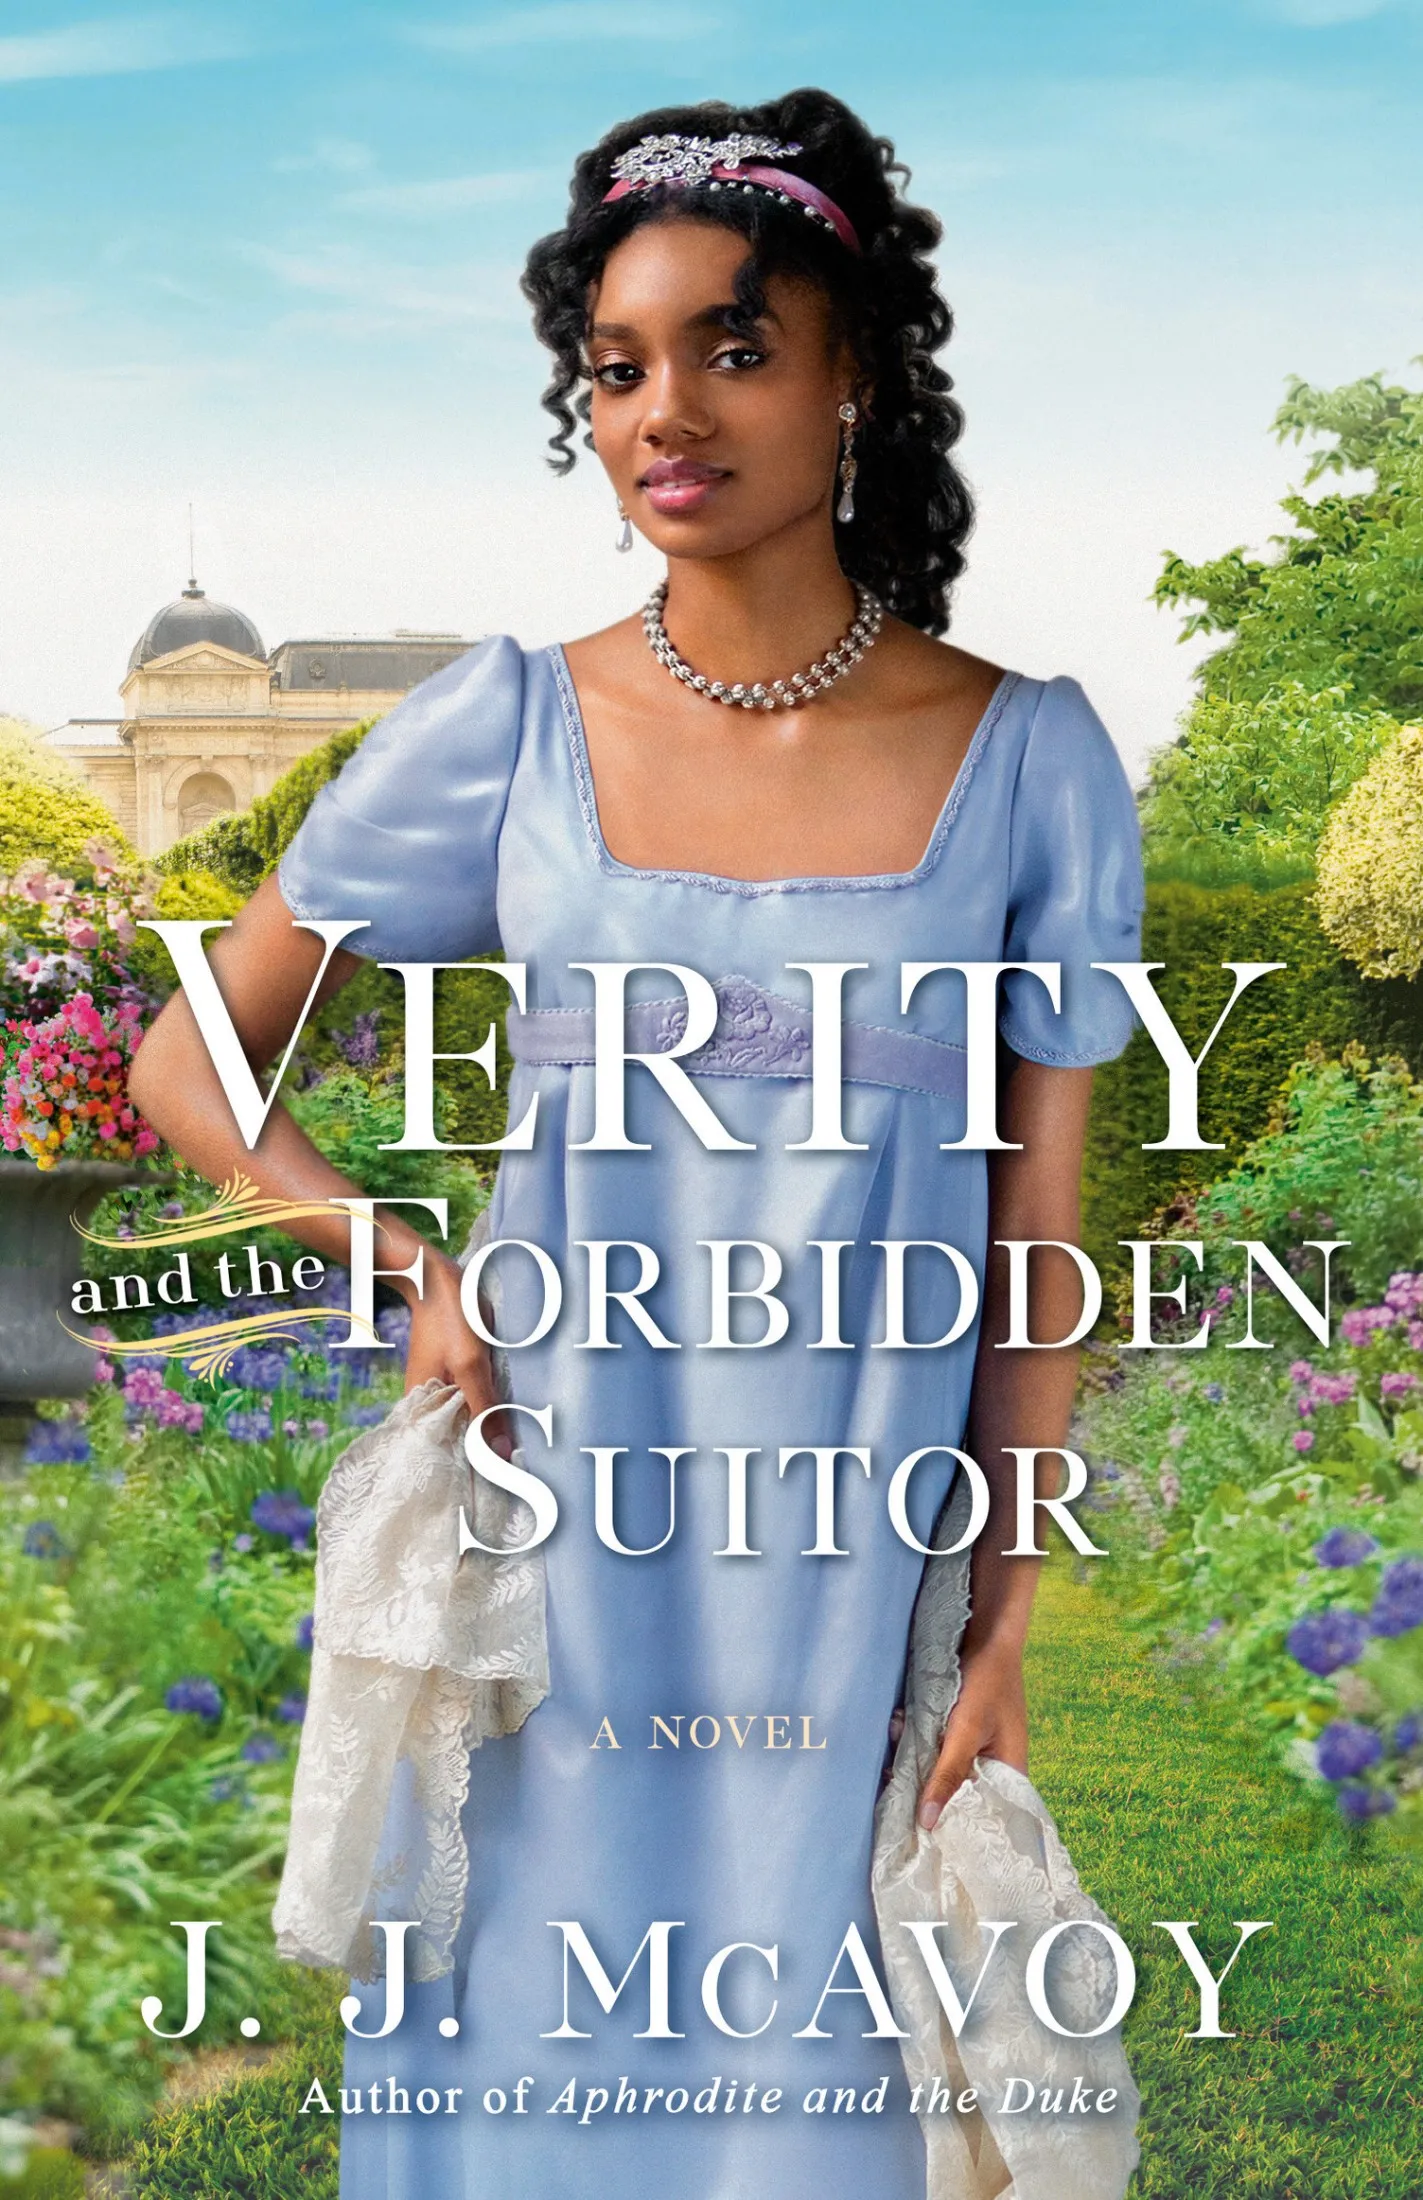 Verity and the Forbidden Suitor (The DuBells #2)